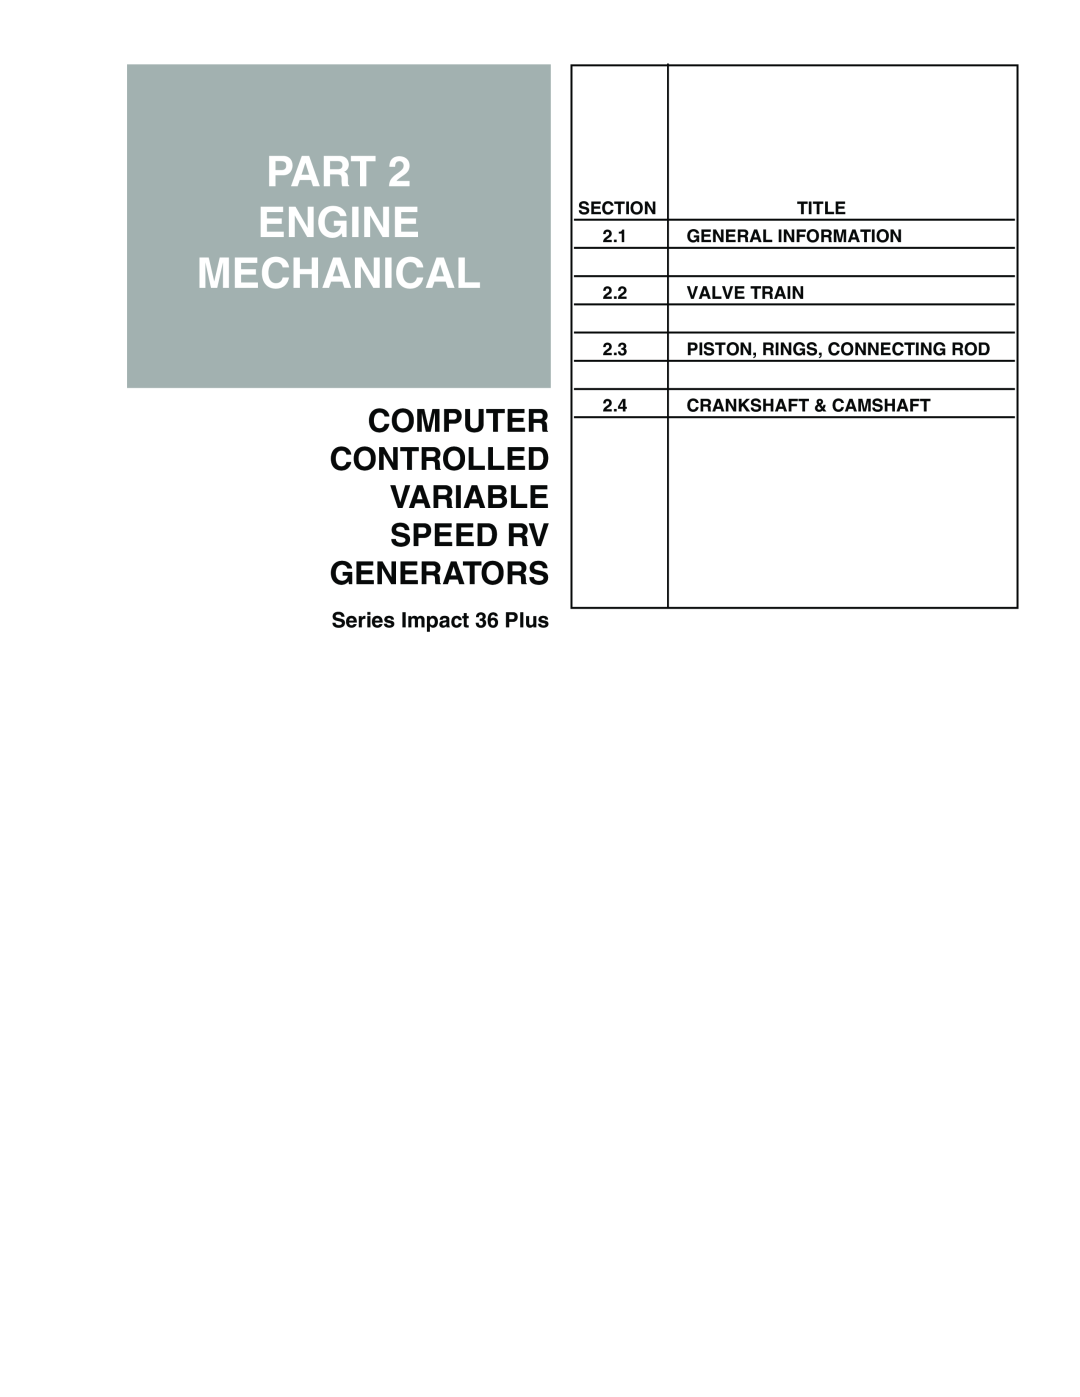 Generac Power Systems 941-2 Part Engine Mechanical, GENERAL INFORMATION 2.2 VALVE TRAIN, Series Impact 36 Plus, Section 